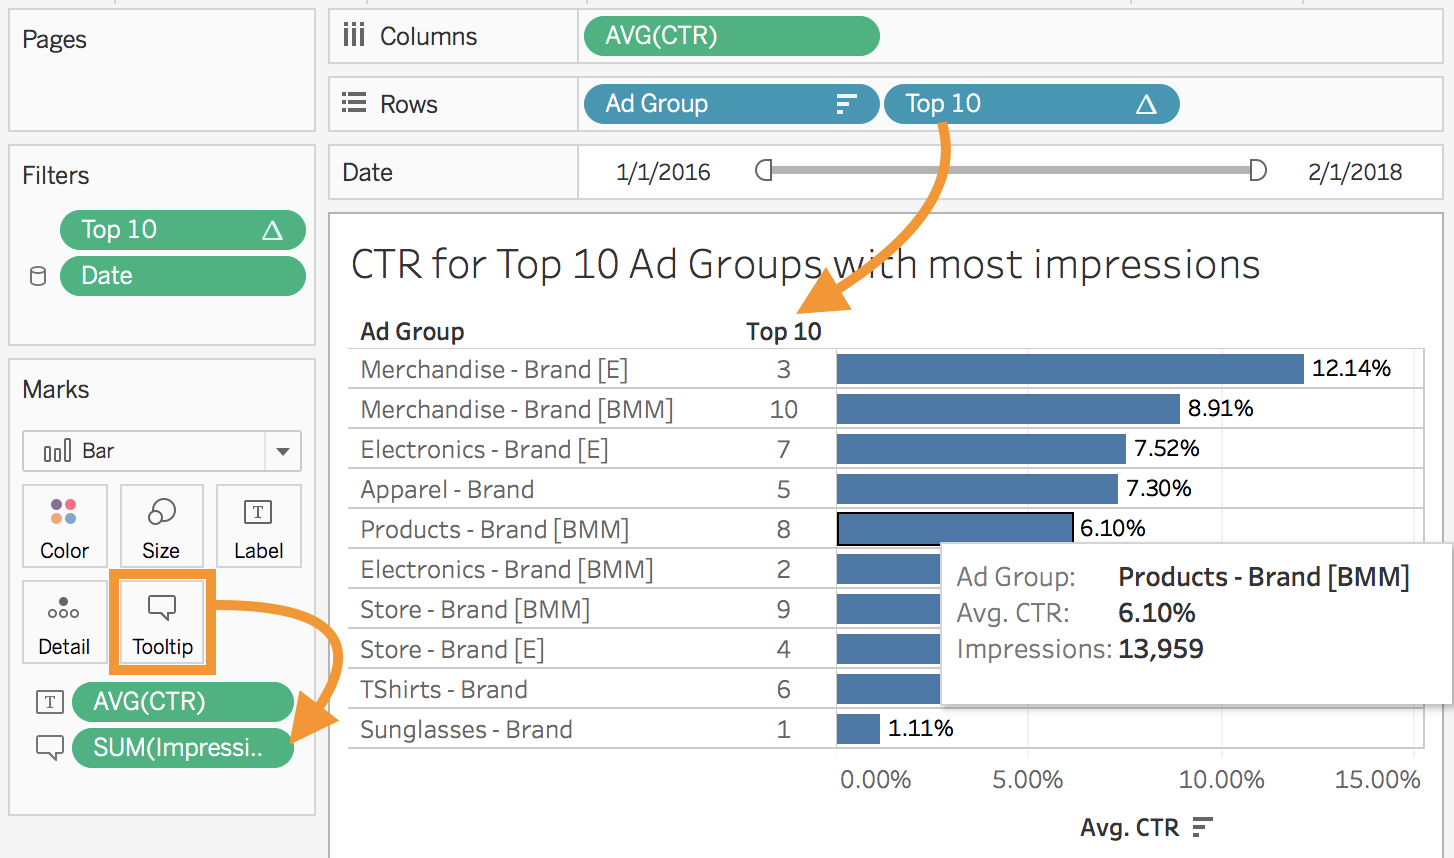 CTR for Top 10 Ad Groups with most impressions